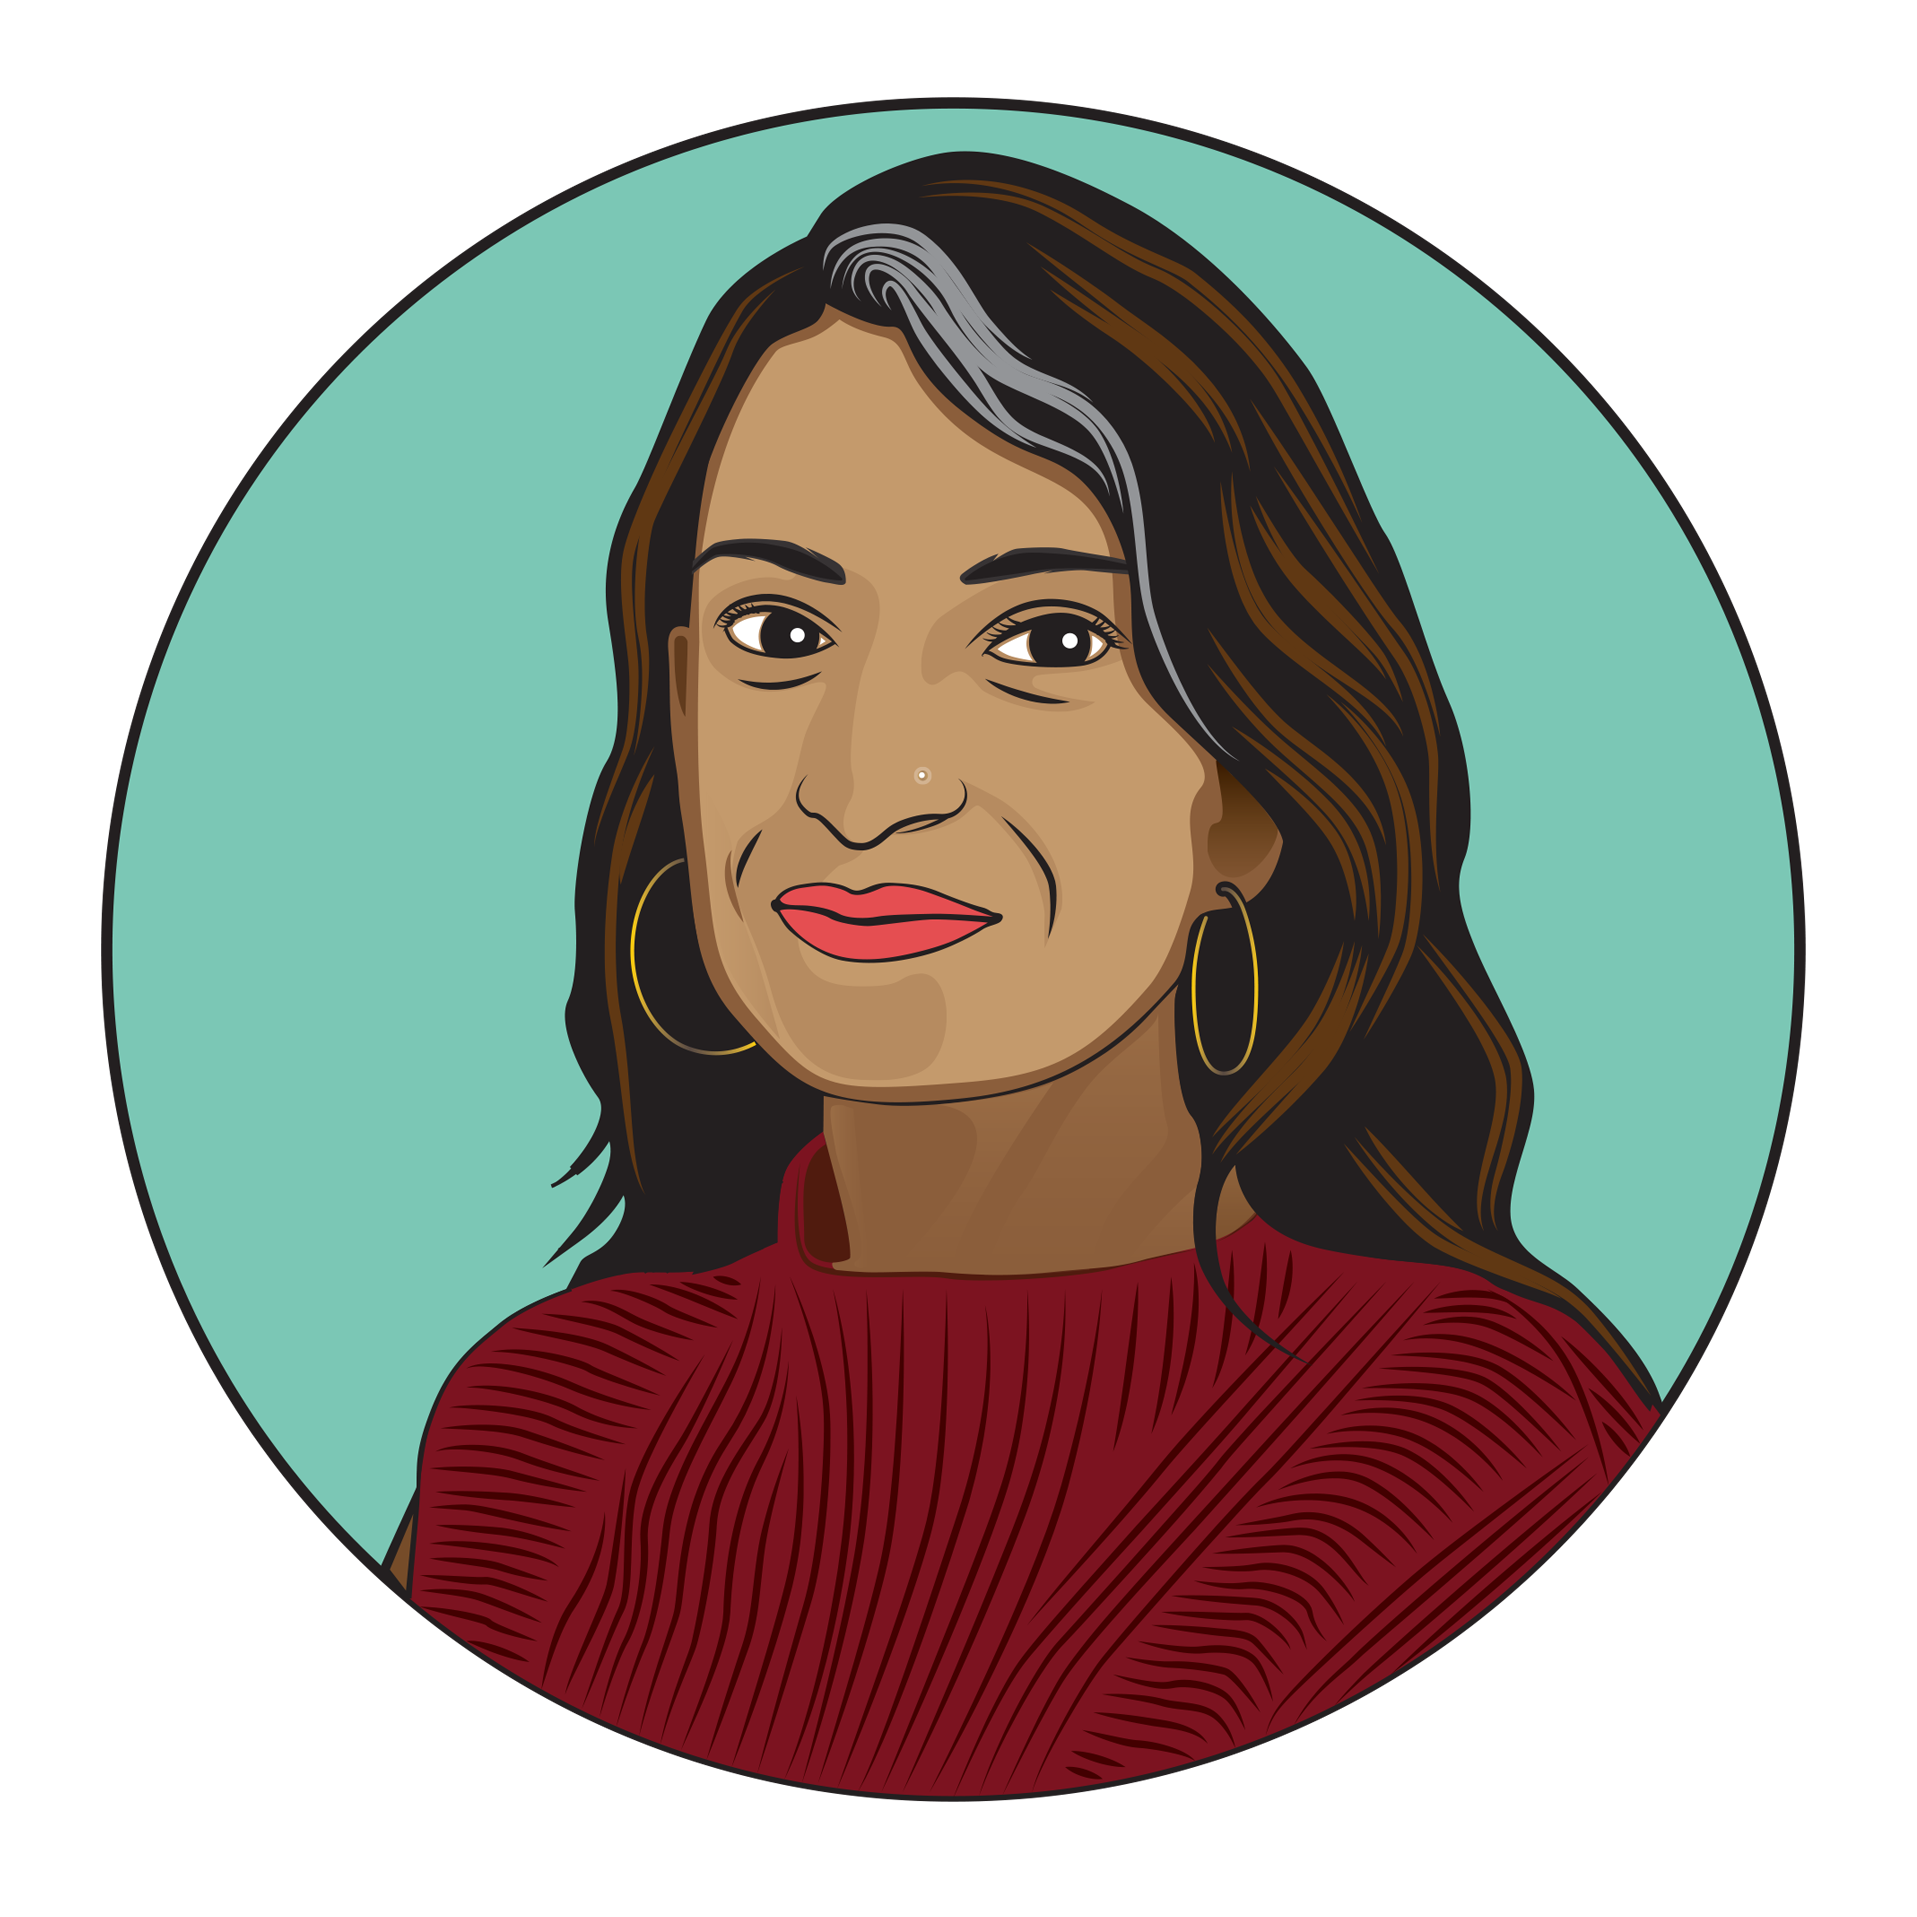 Illustrated image of Sheila wearing red lipstick, a burgundy shirt, and gold earrings. Sheila has a gray streak in the front of her brown hair. Her image has a teal background.